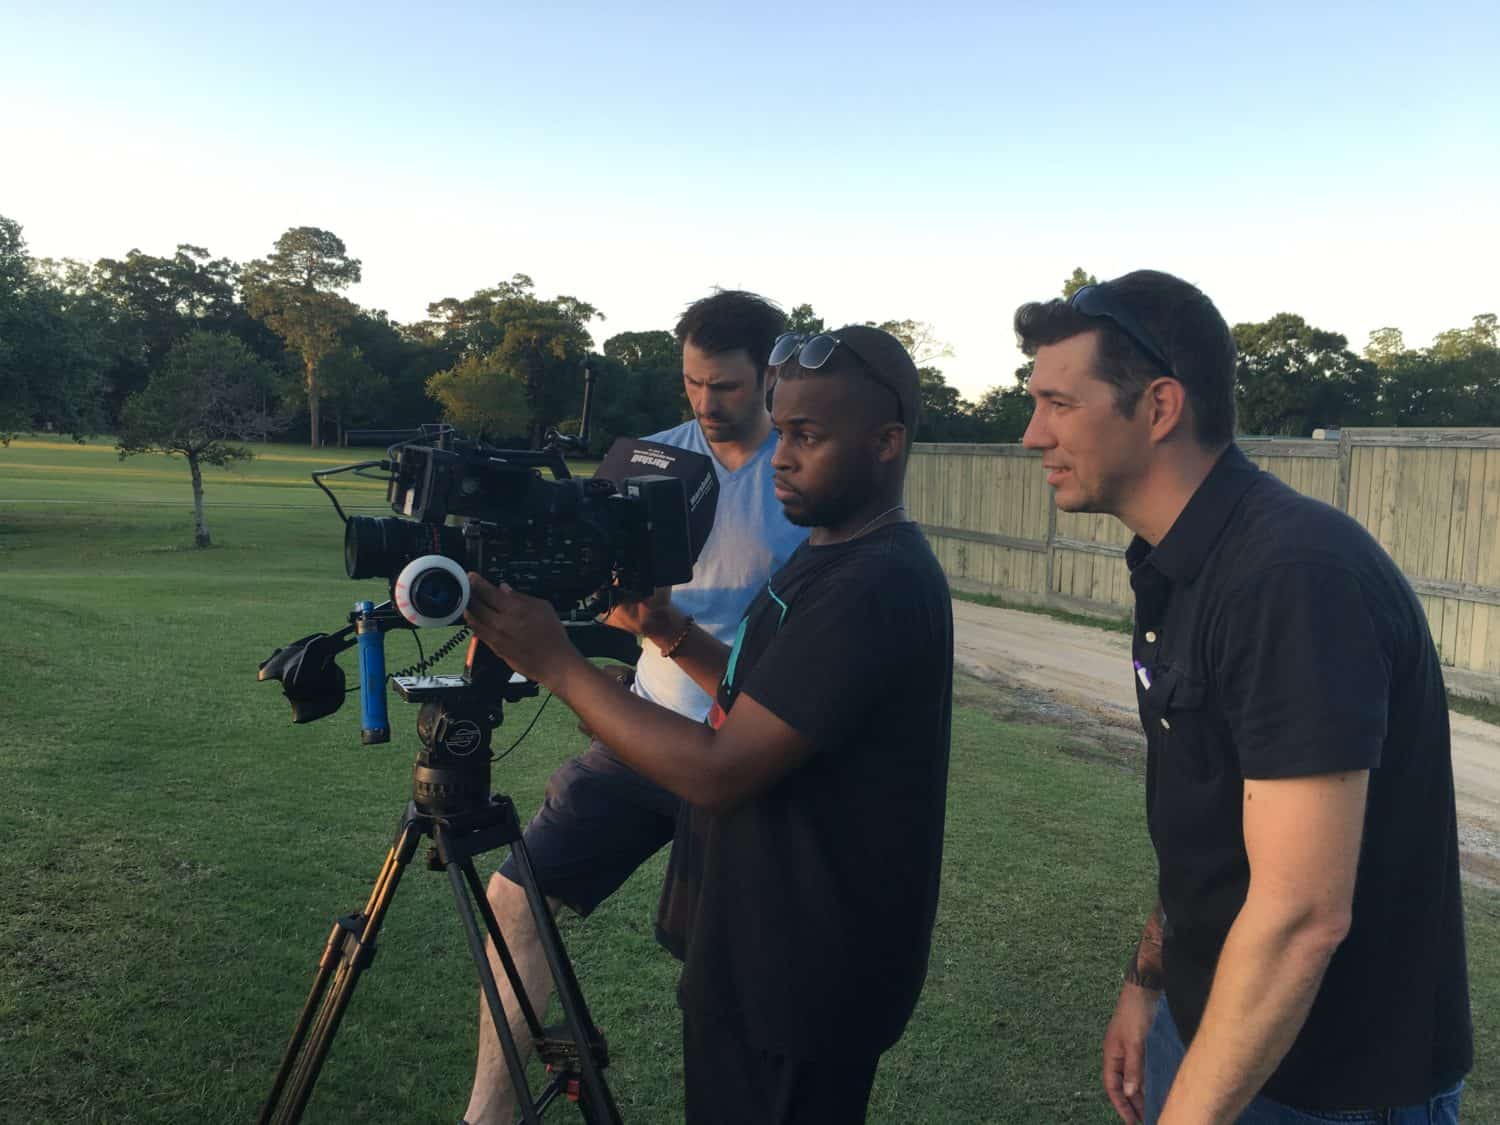 Three camera men talk about camera angles in a park on a sunny day